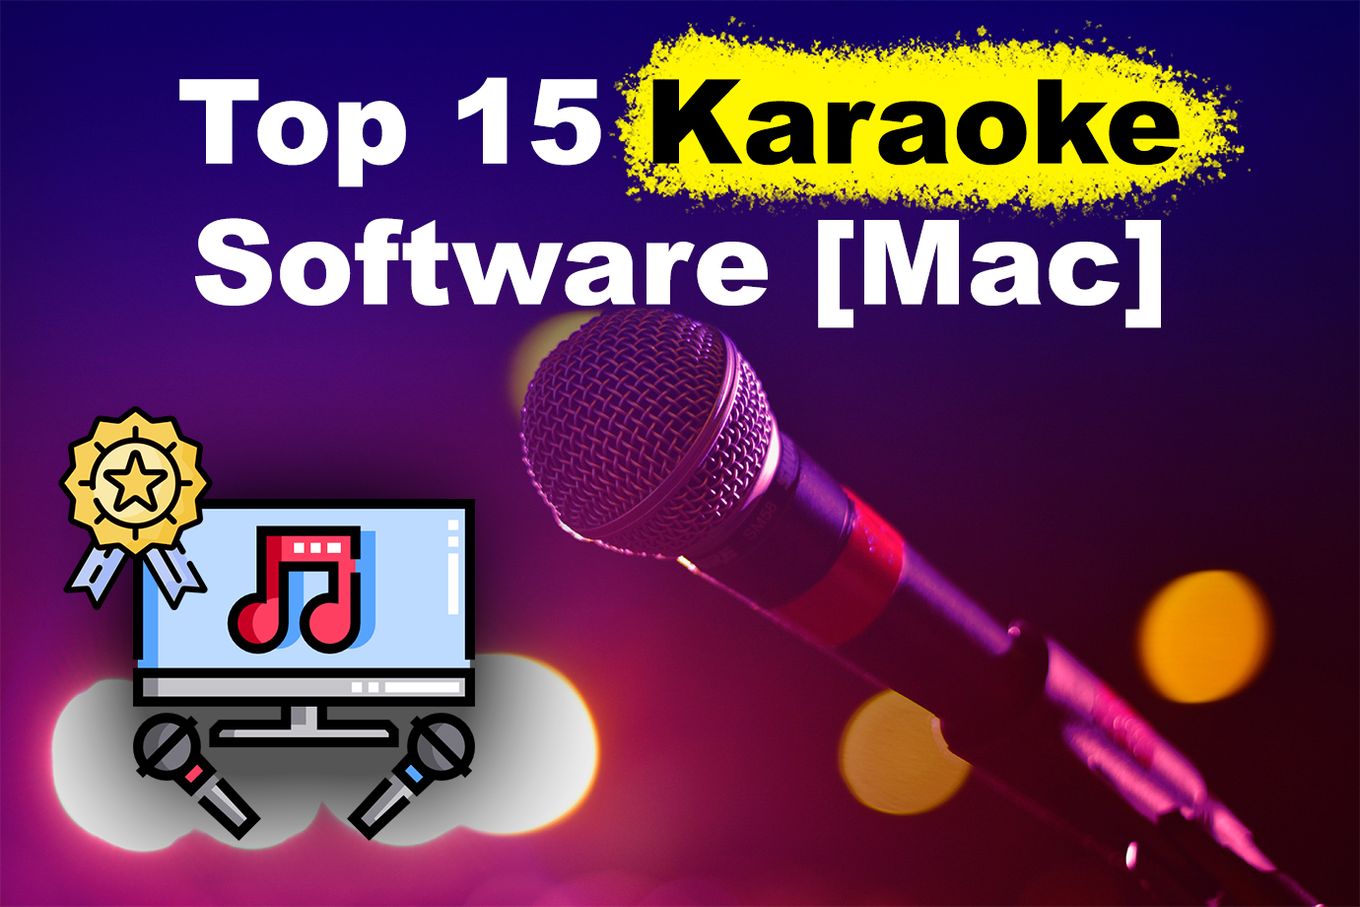 The top karaoke software for your mac